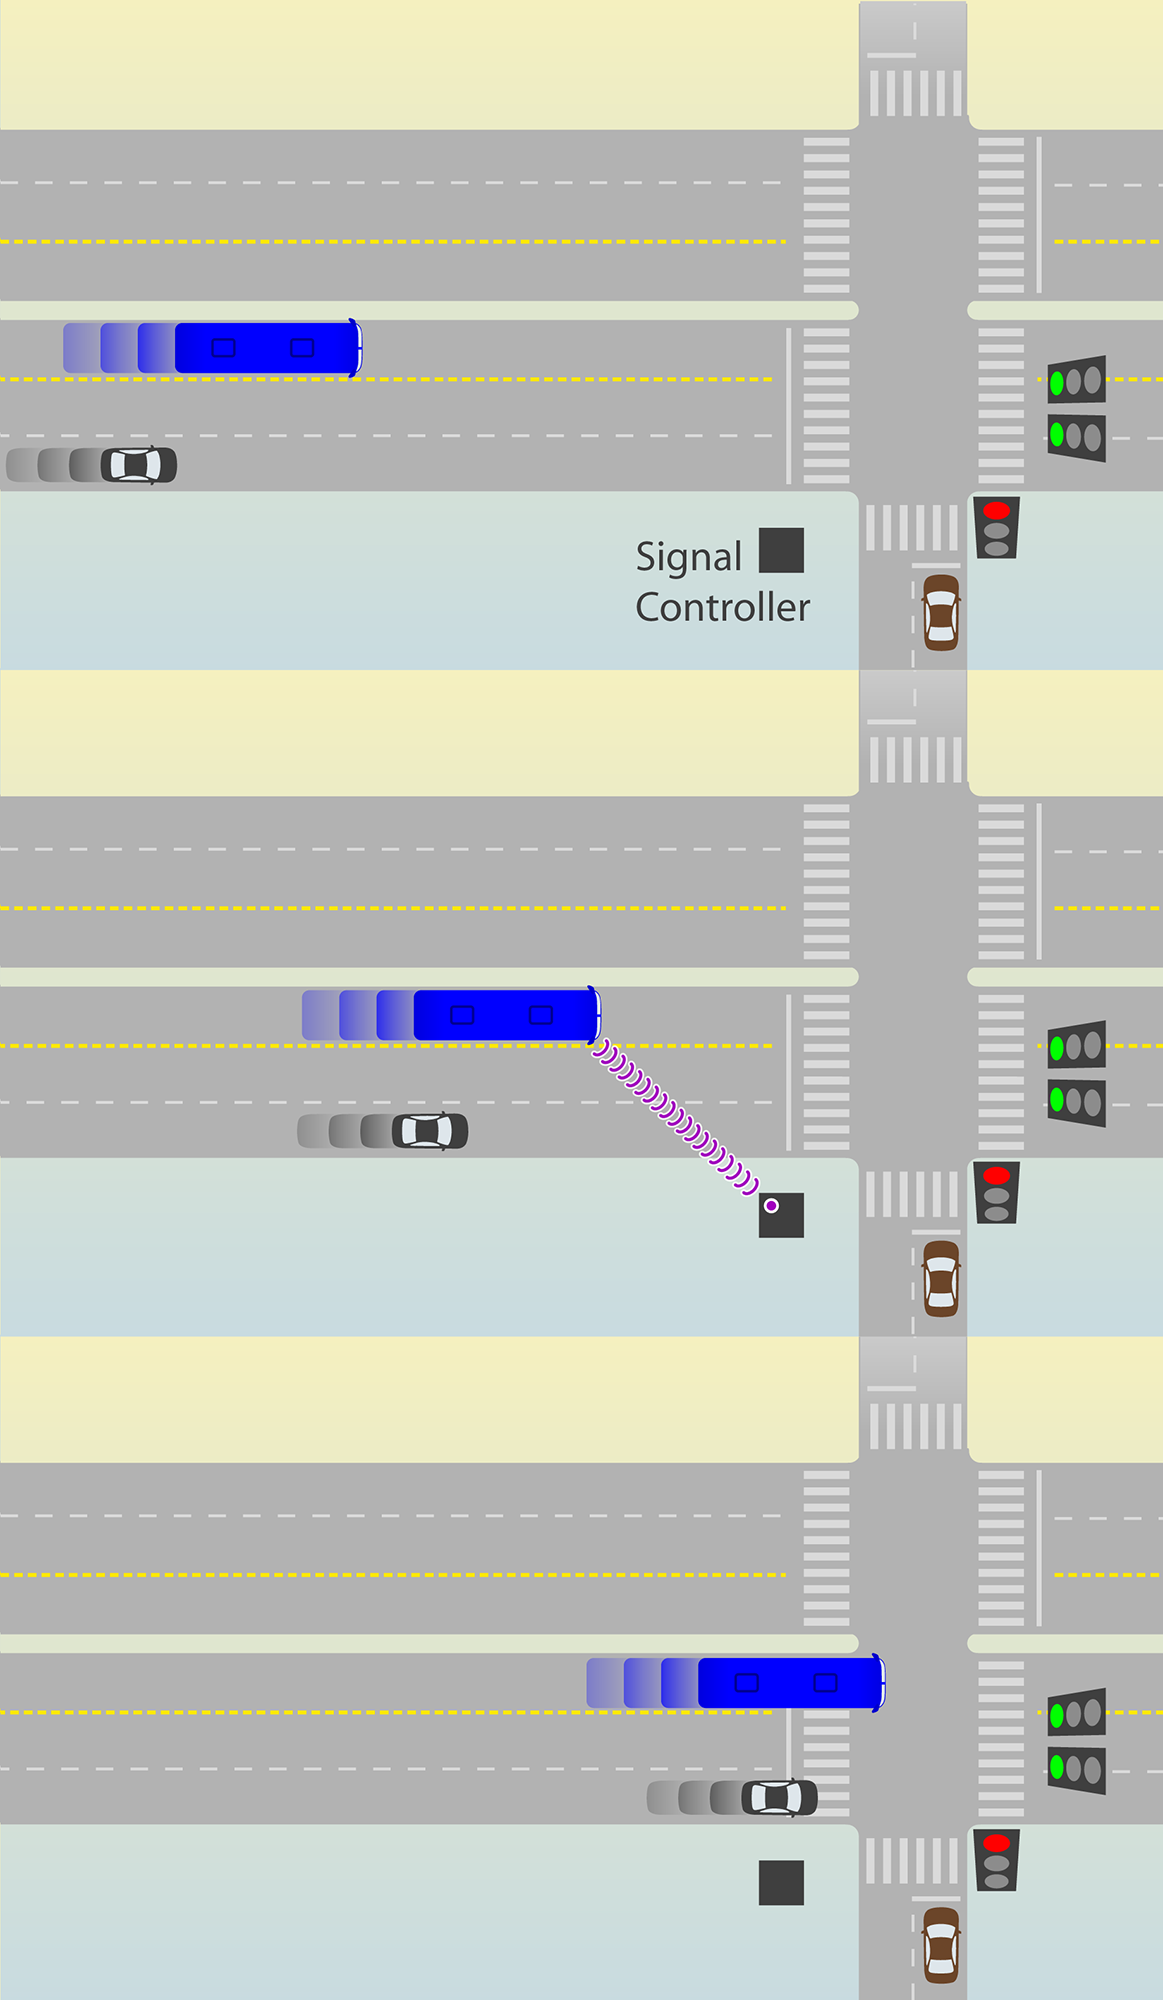 Fig. 24.19 Using active priority, the green time for the BRT corridor is extended when a BRT vehicle is detected approaching the intersection.